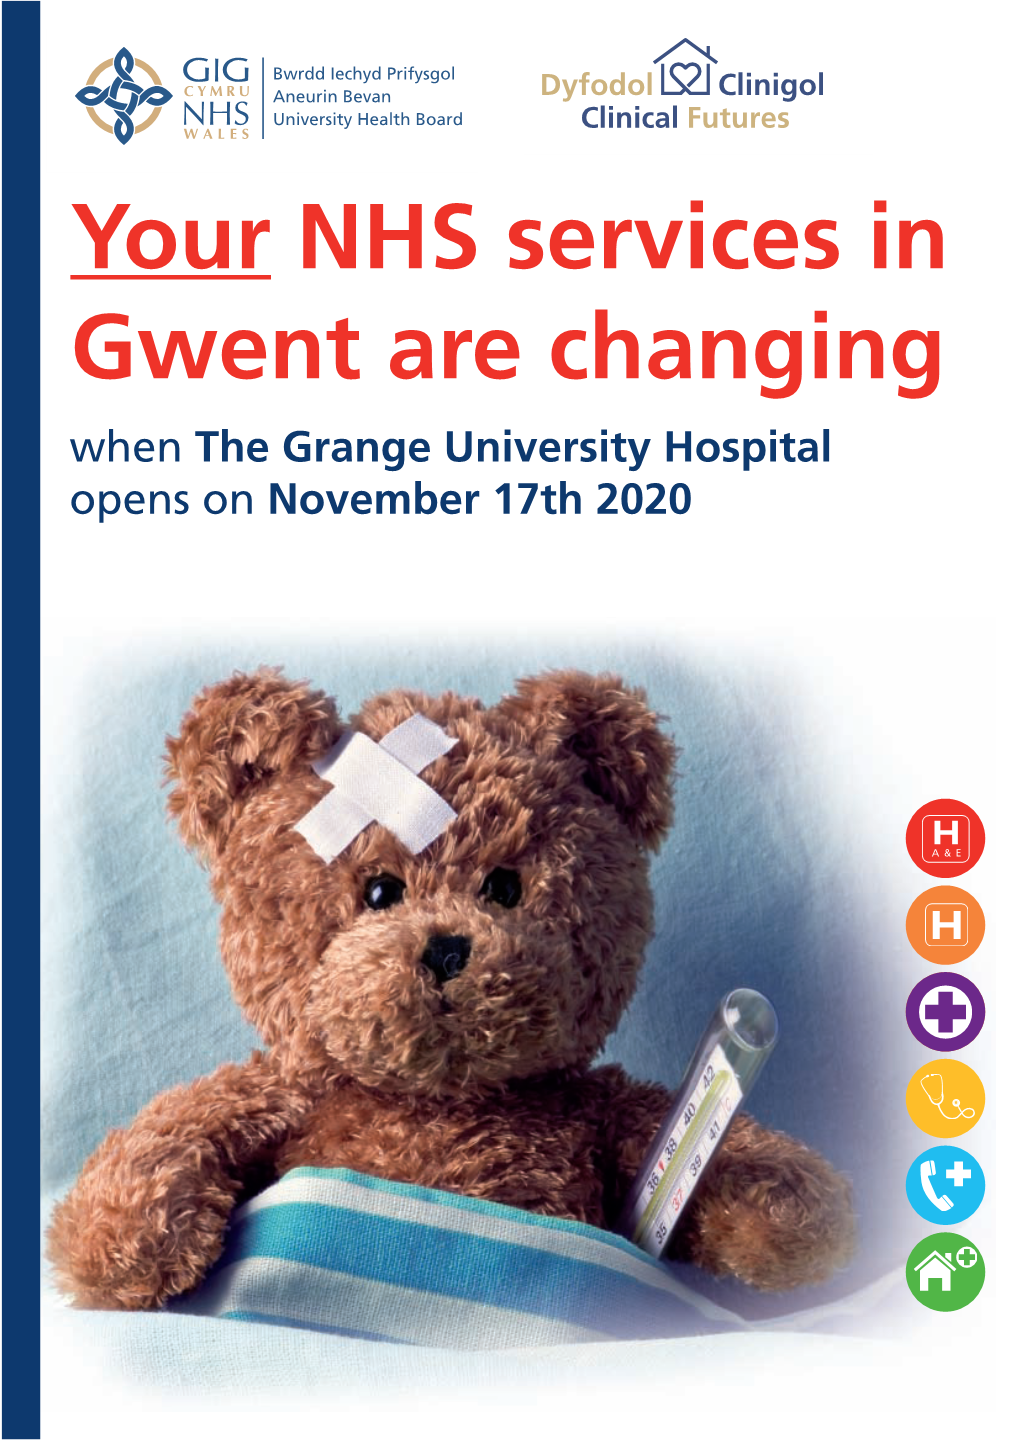 Your NHS Services in Gwent Are Changing When the Grange University Hospital Opens on November 17Th 2020 Changes to Emergency Hospital Services